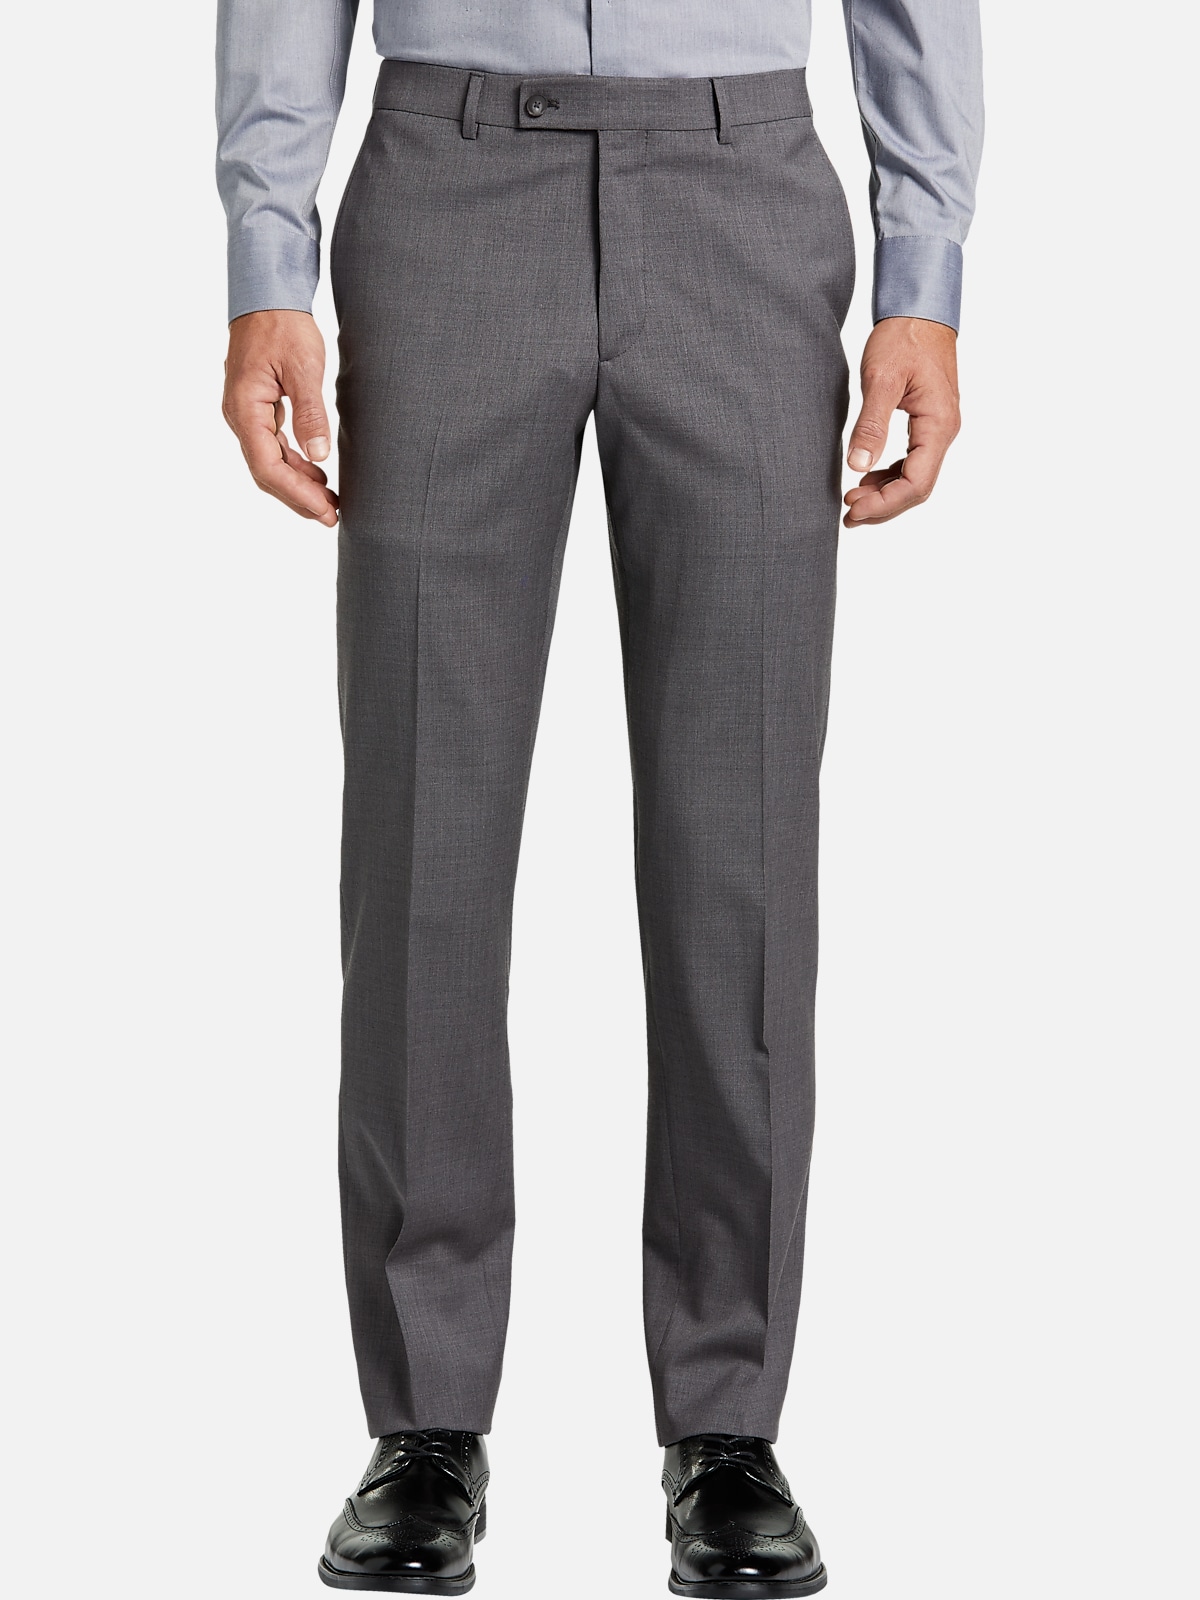 Awearness Kenneth Cole AWEAR-TECH Slim Fit Suit Separates Pants | Pants ...